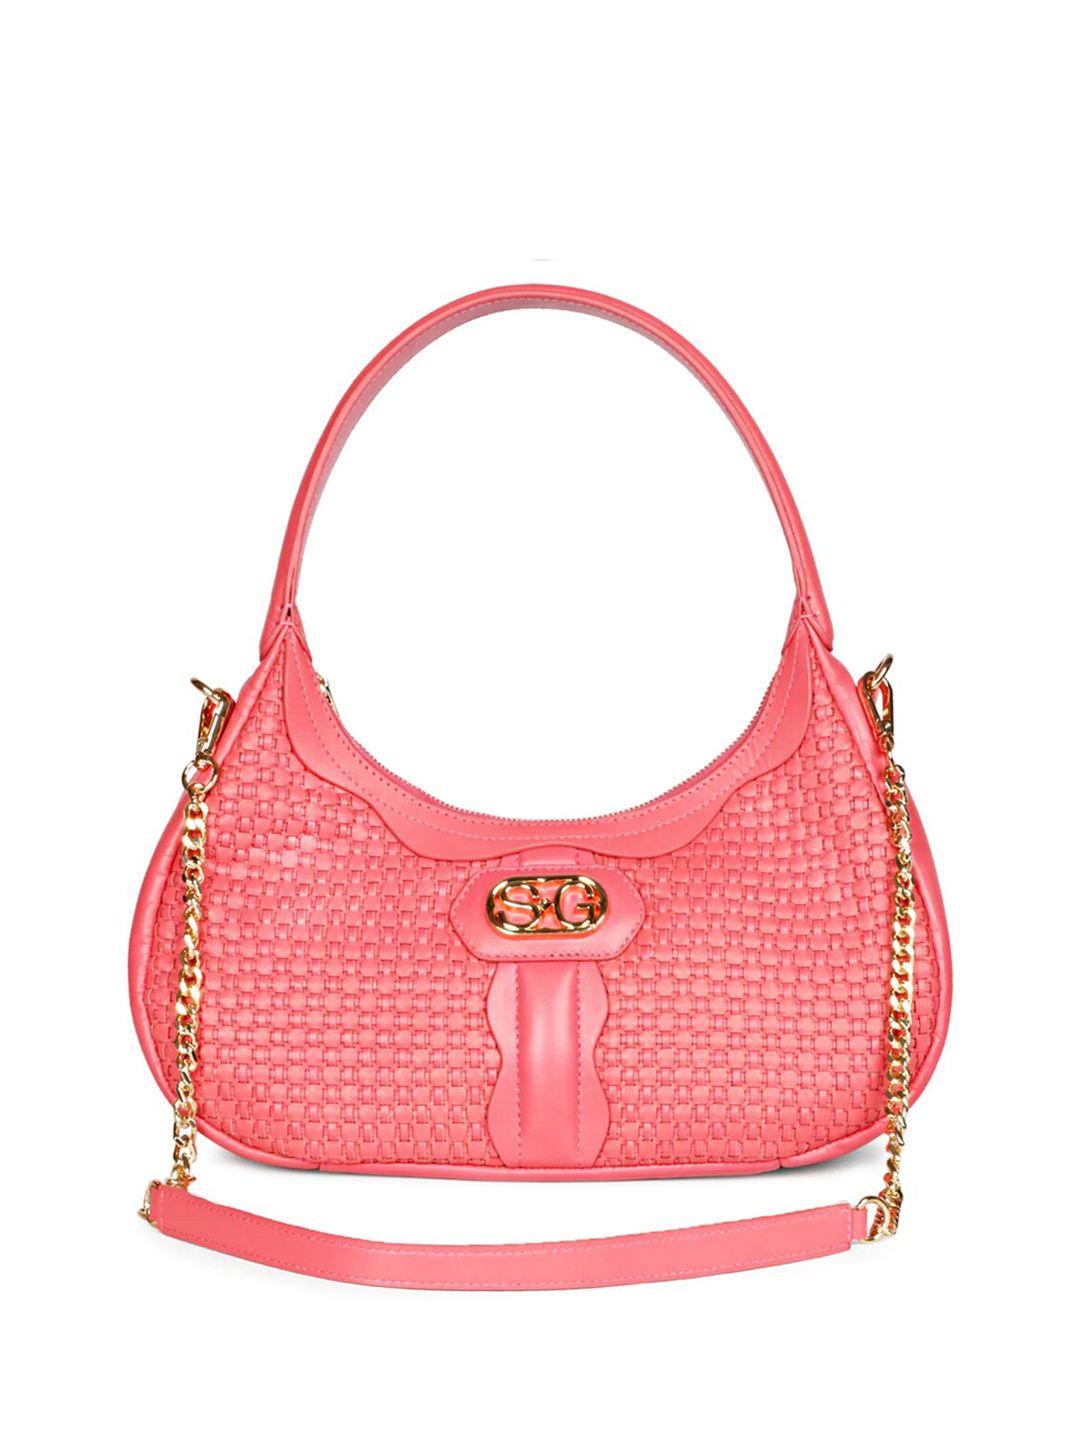 saint g textured structured leather hobo bag